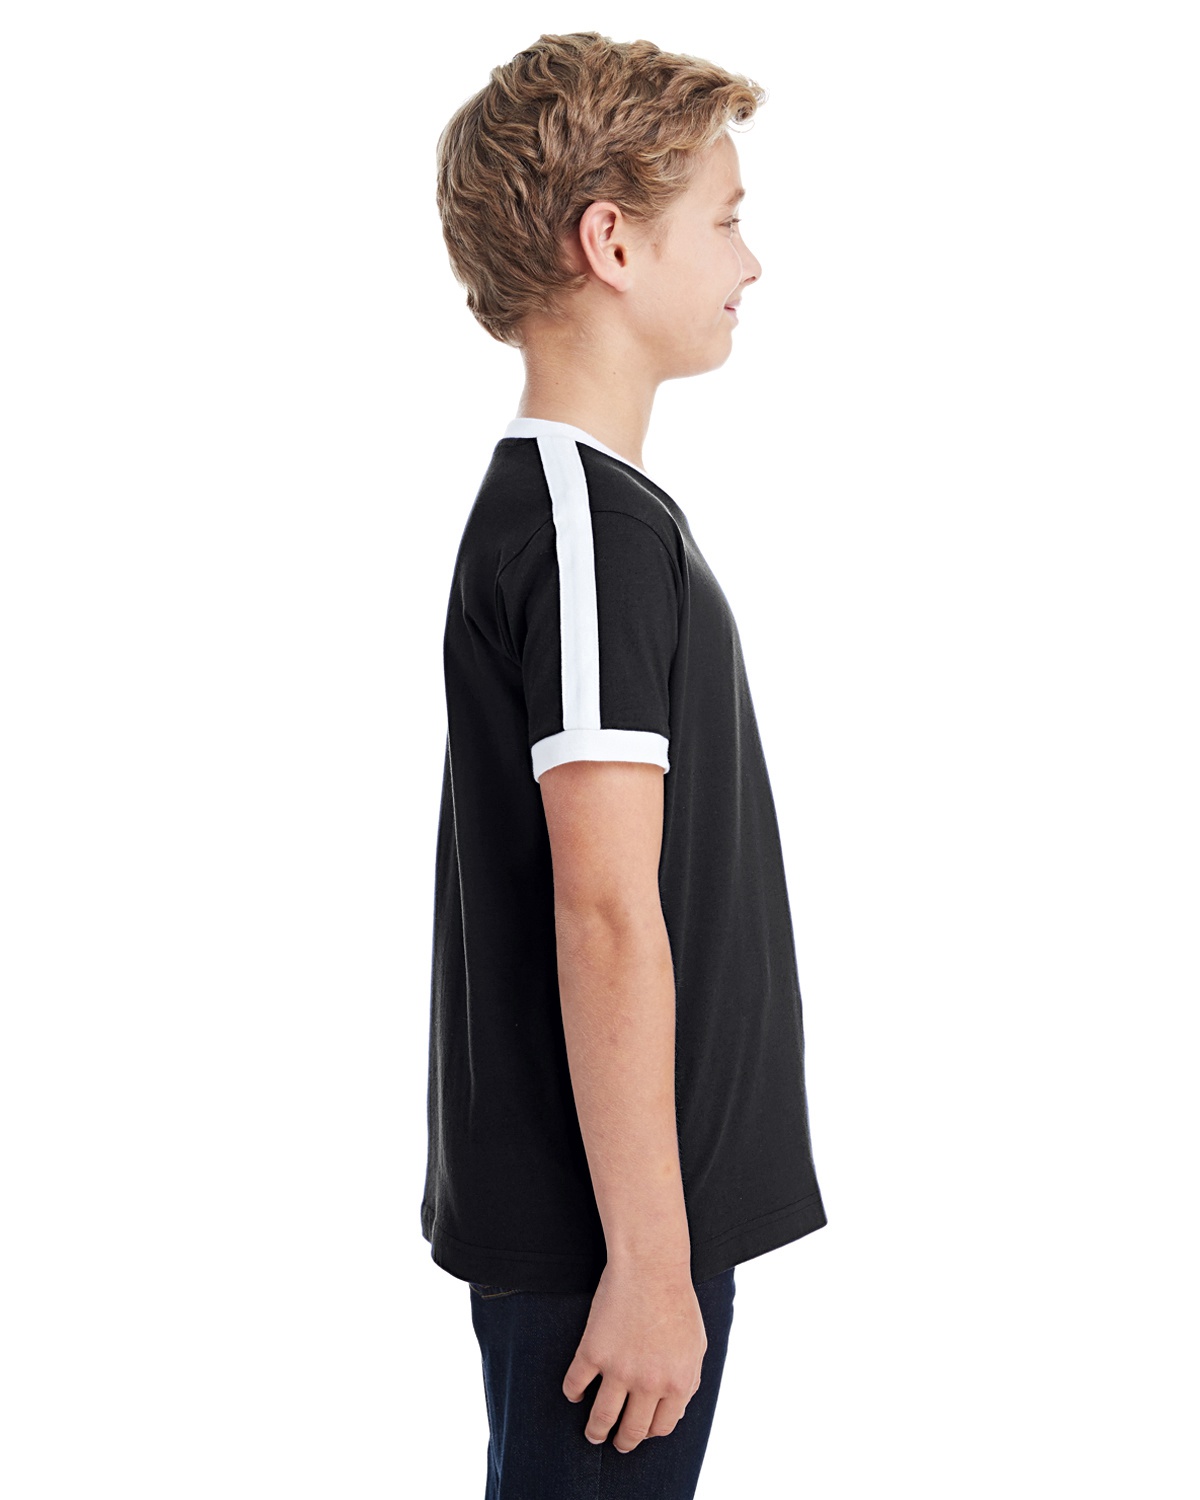 'LAT 6132 Youth Soccer Ringer Fine Jersey T-Shirt'